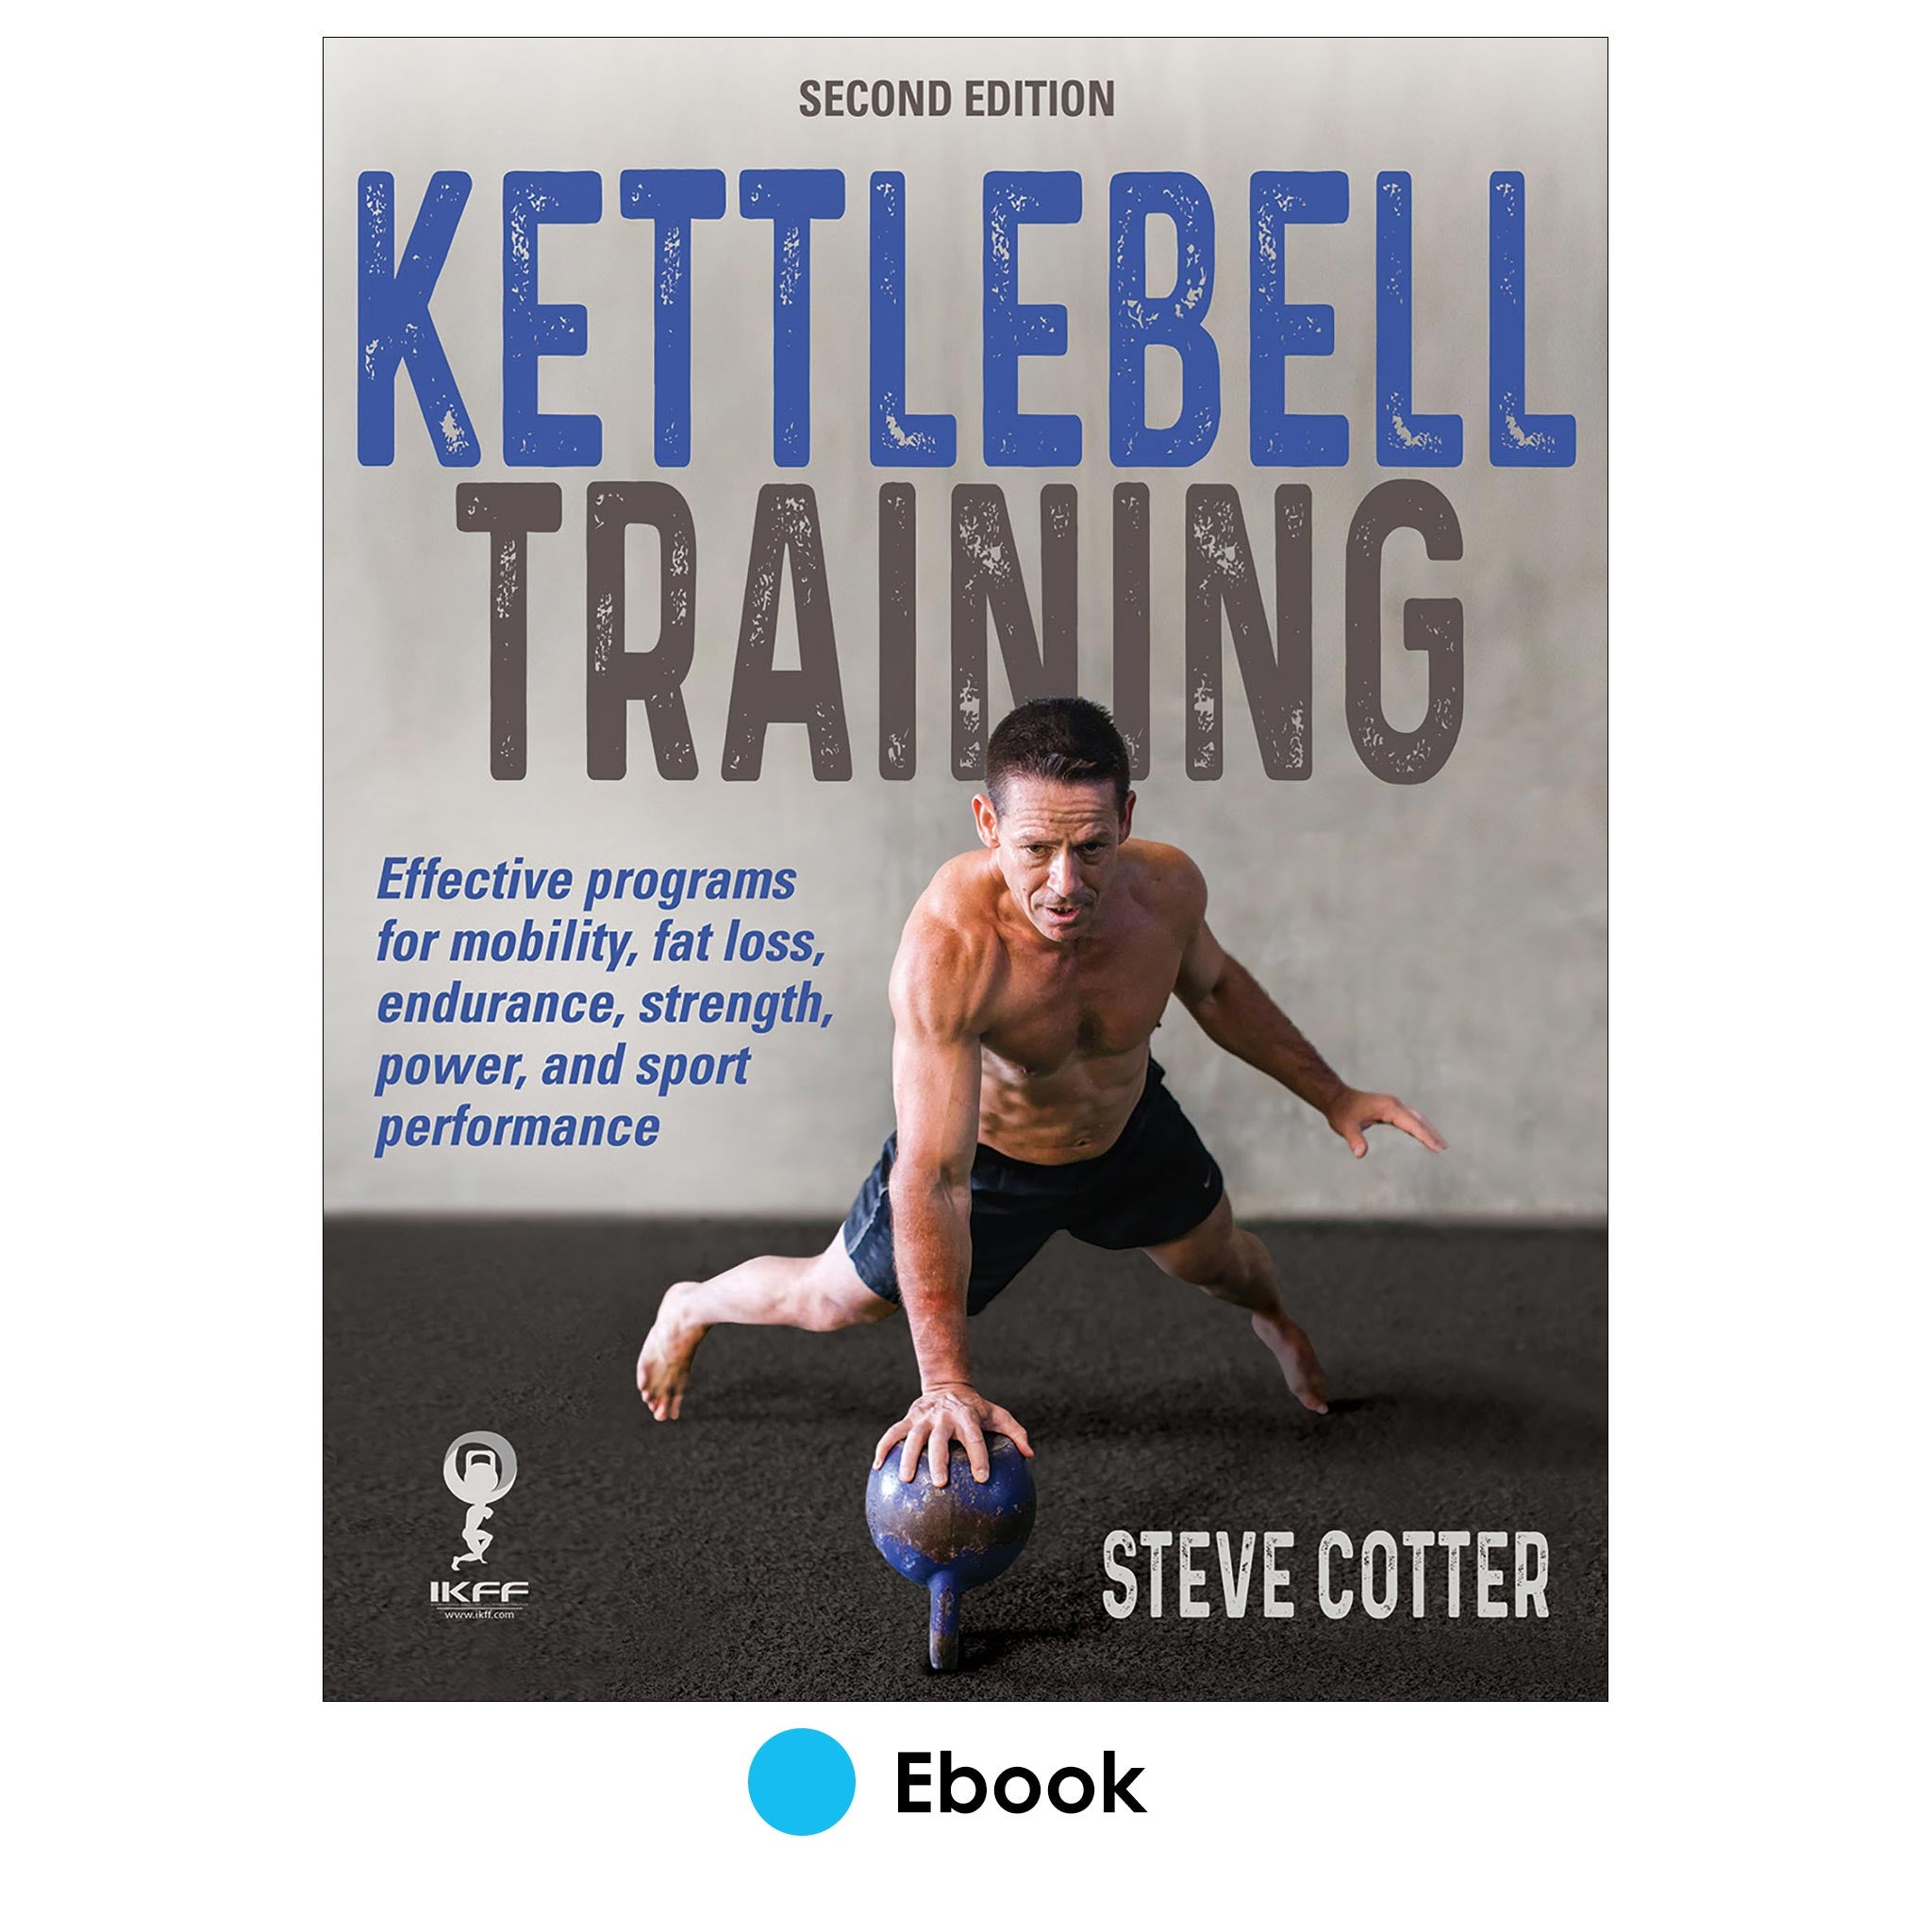 The Movement Presents: Kettlebell: Swing and Turkish Get Ups